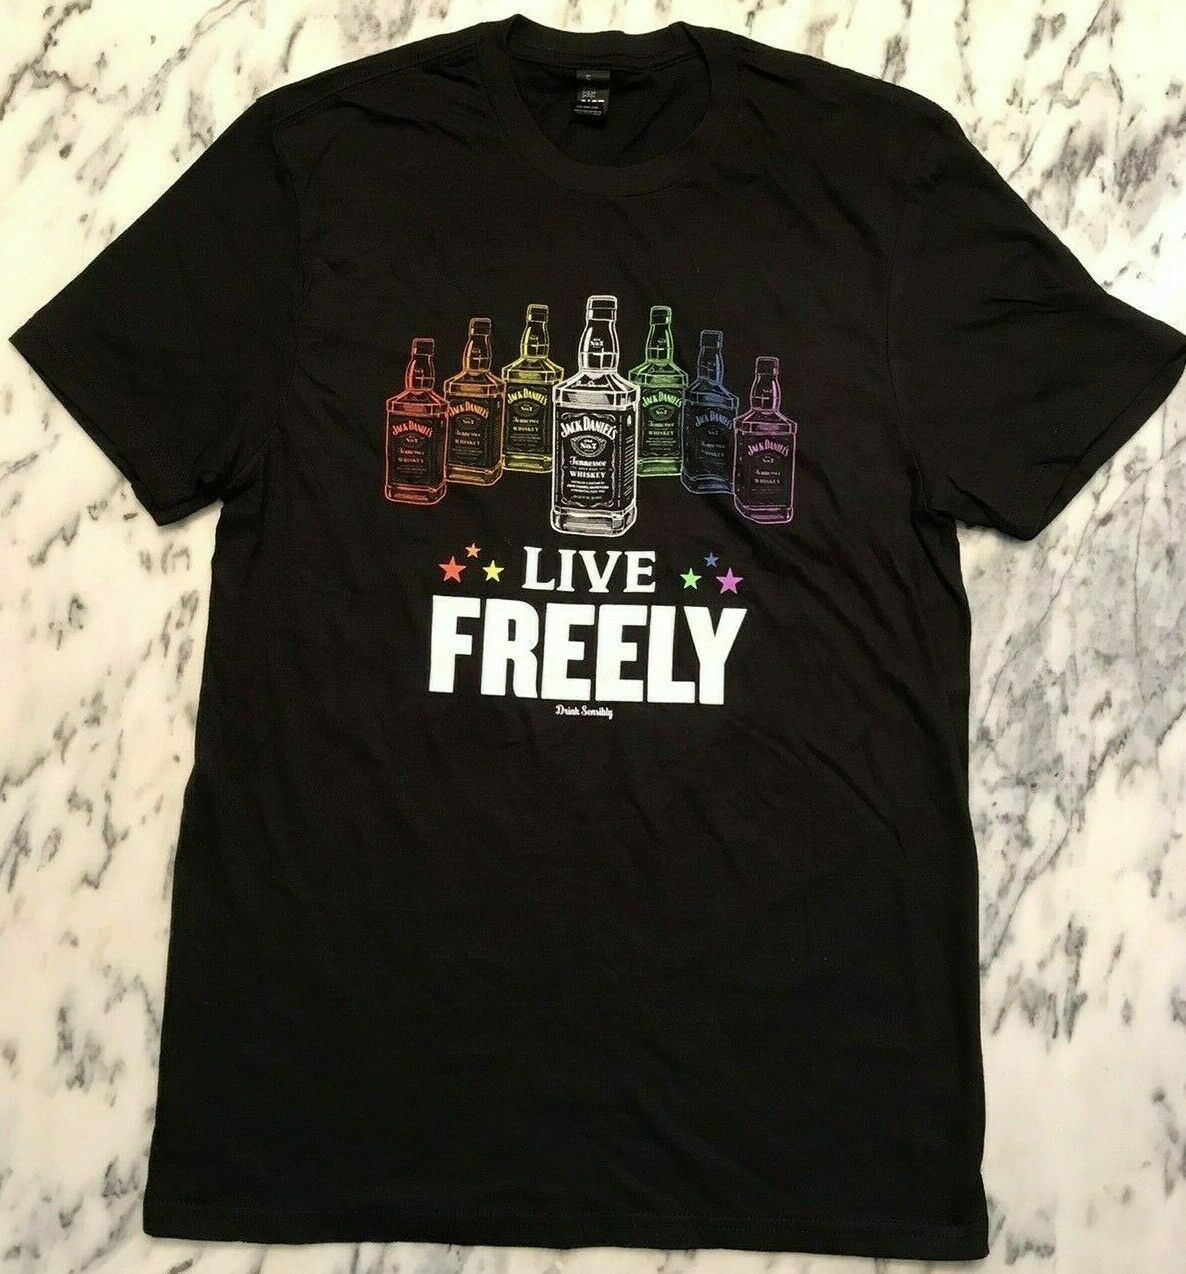 Jack Daniels Tennessee Whiskey Live Freely Men's T-shirt Size Small -new